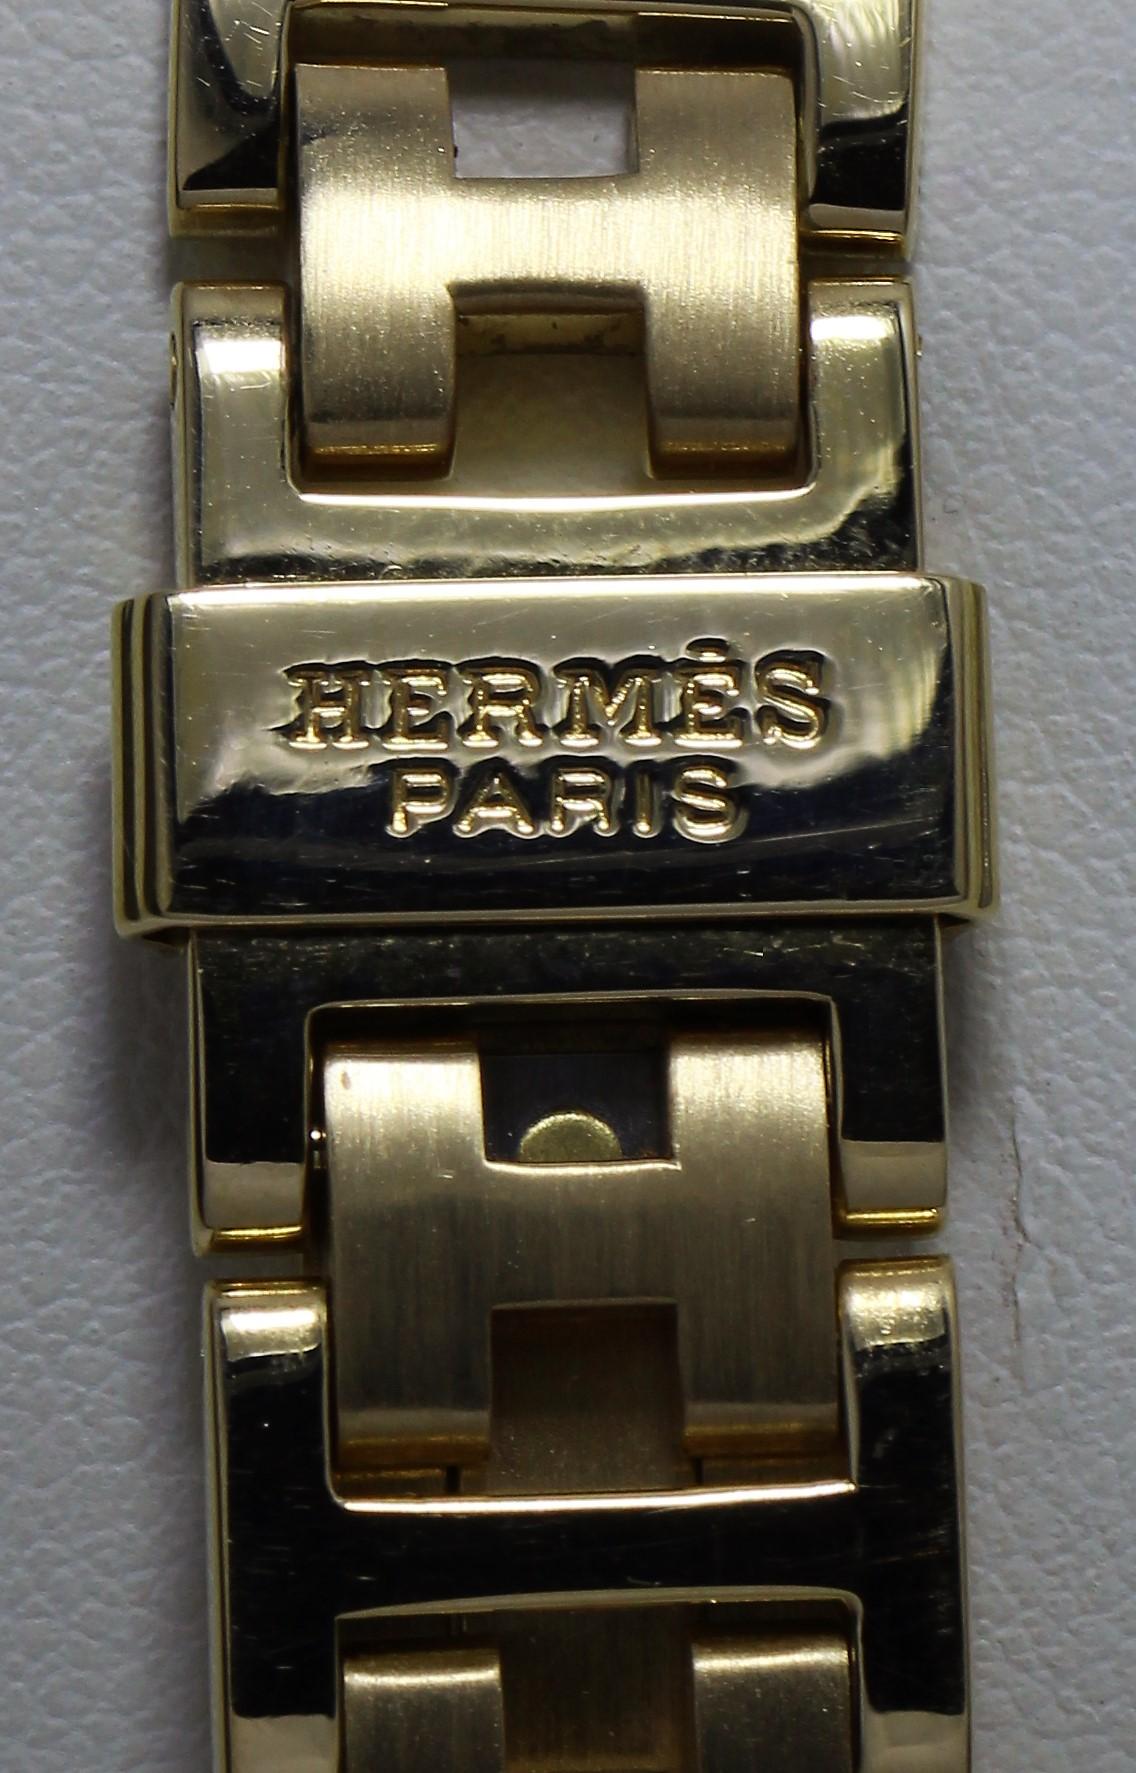 Hermes 18 Karat Gold Watch with Diamond Studded Bezel and Belt In Good Condition For Sale In New York, NY